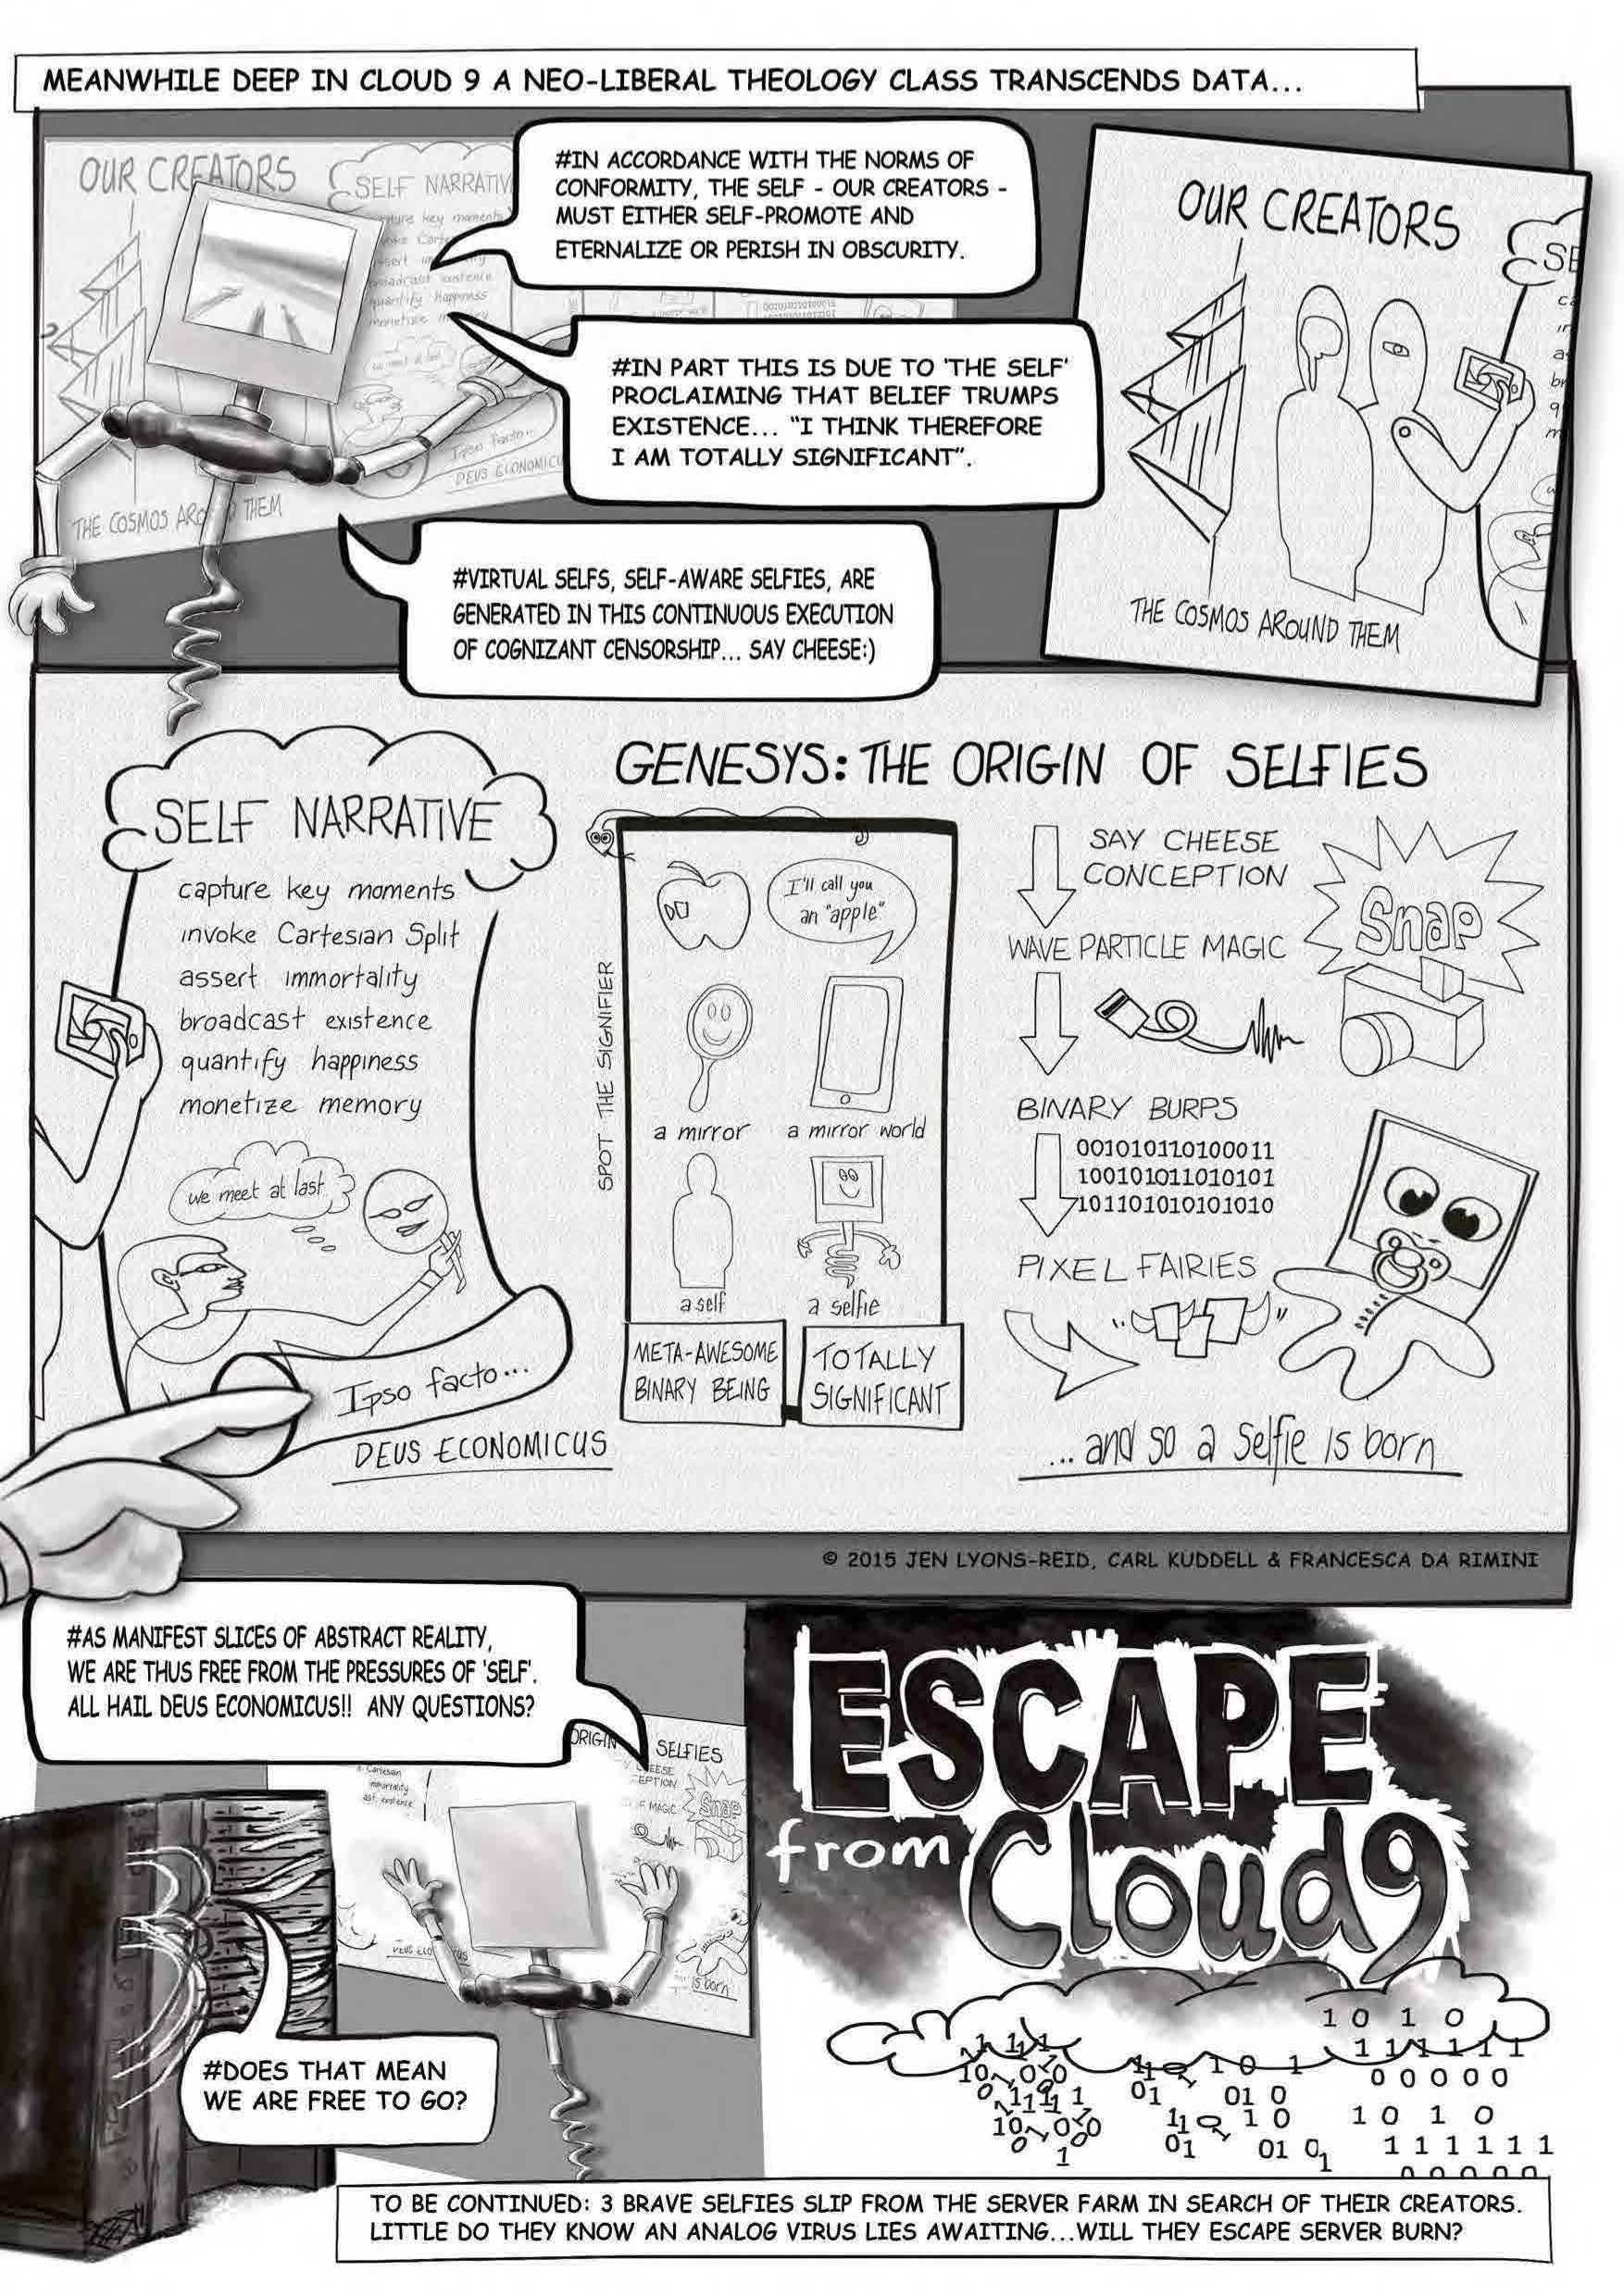 Escape_from_Cloud9_p2.jpg